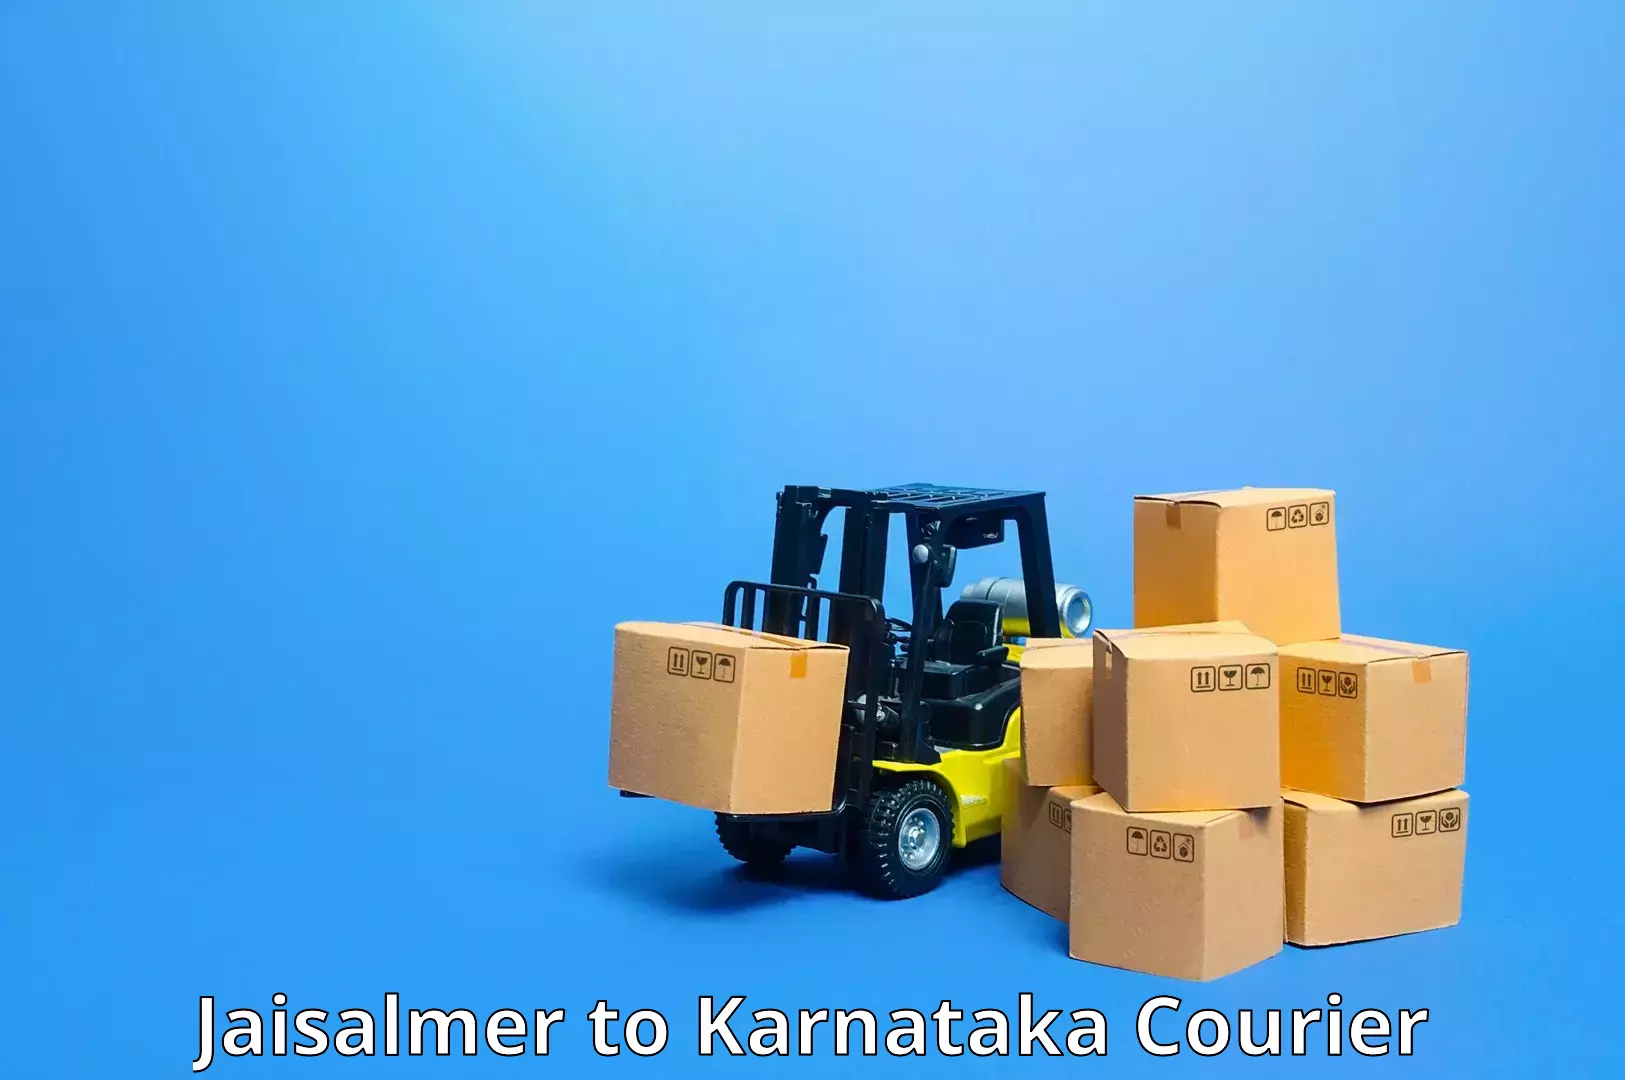 Nationwide shipping coverage Jaisalmer to Manipal